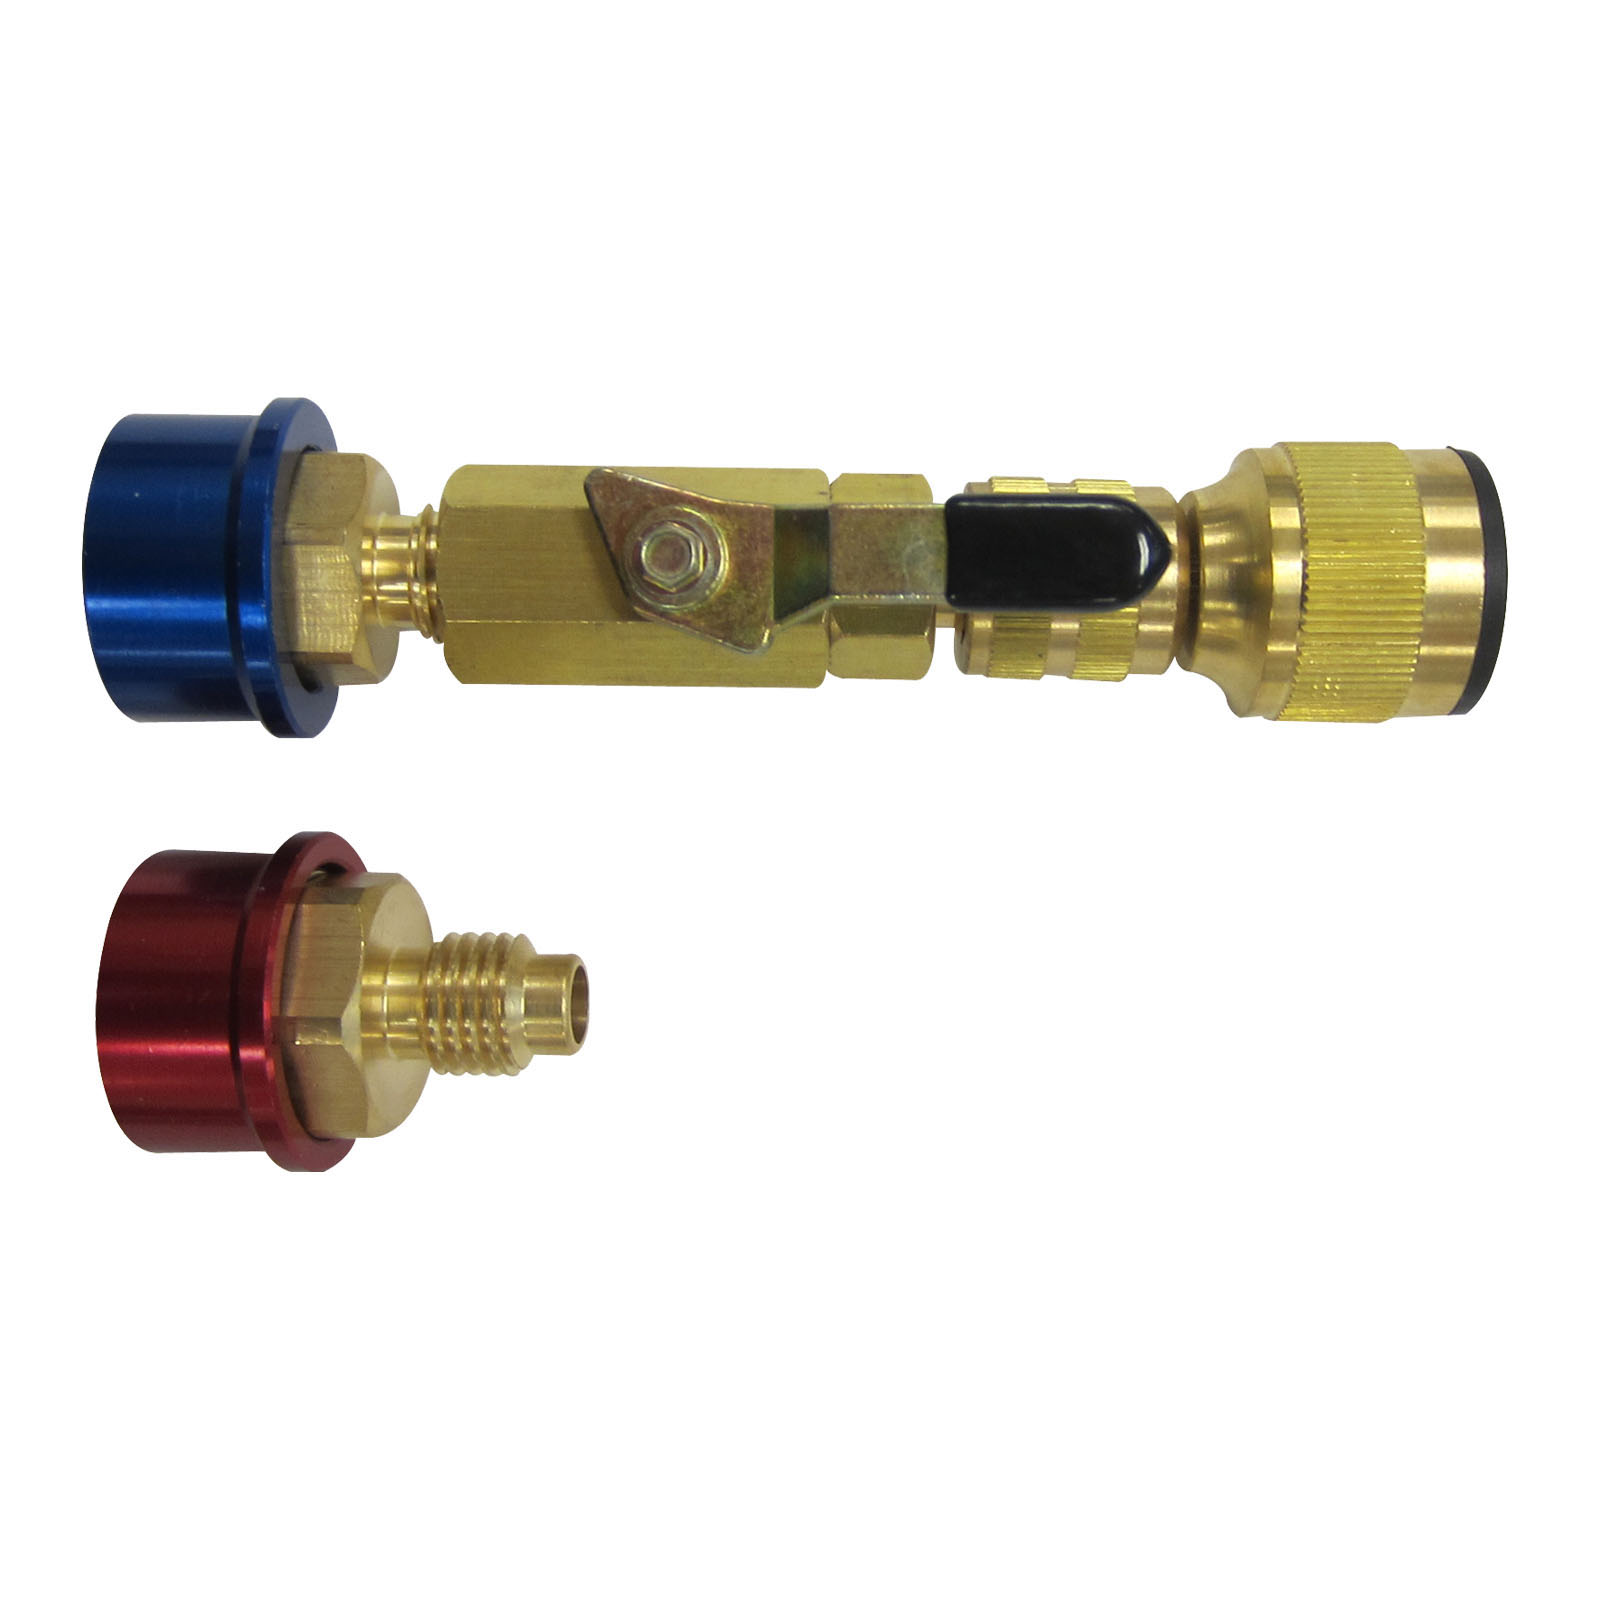 R134a R22 R410a A/C Valve Core Remover Installer Changer 1/4 SAE Valve Core Tools Refrigeration Air Condition Services XUXUWA Valves 